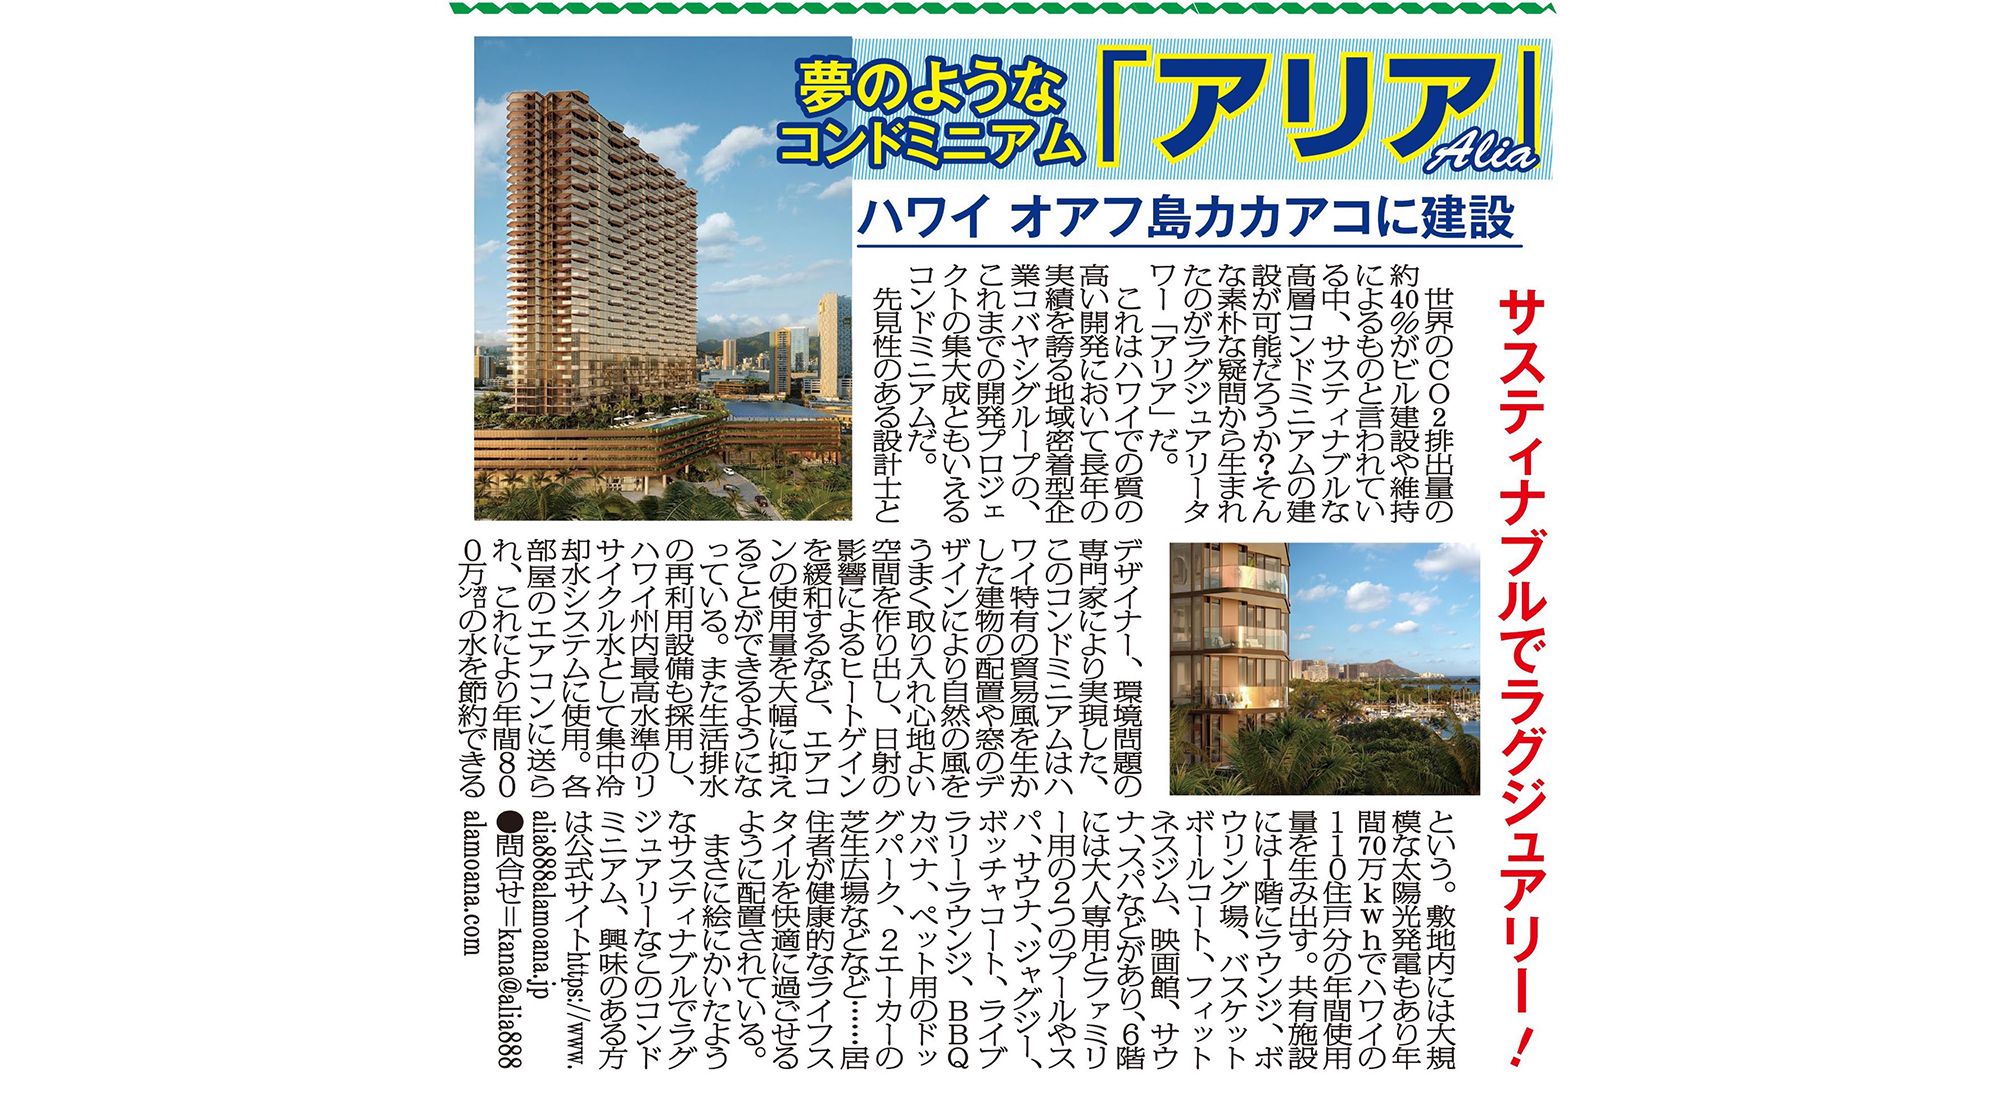 News - Japanese media highlights Ālia’s approach to sustainable design